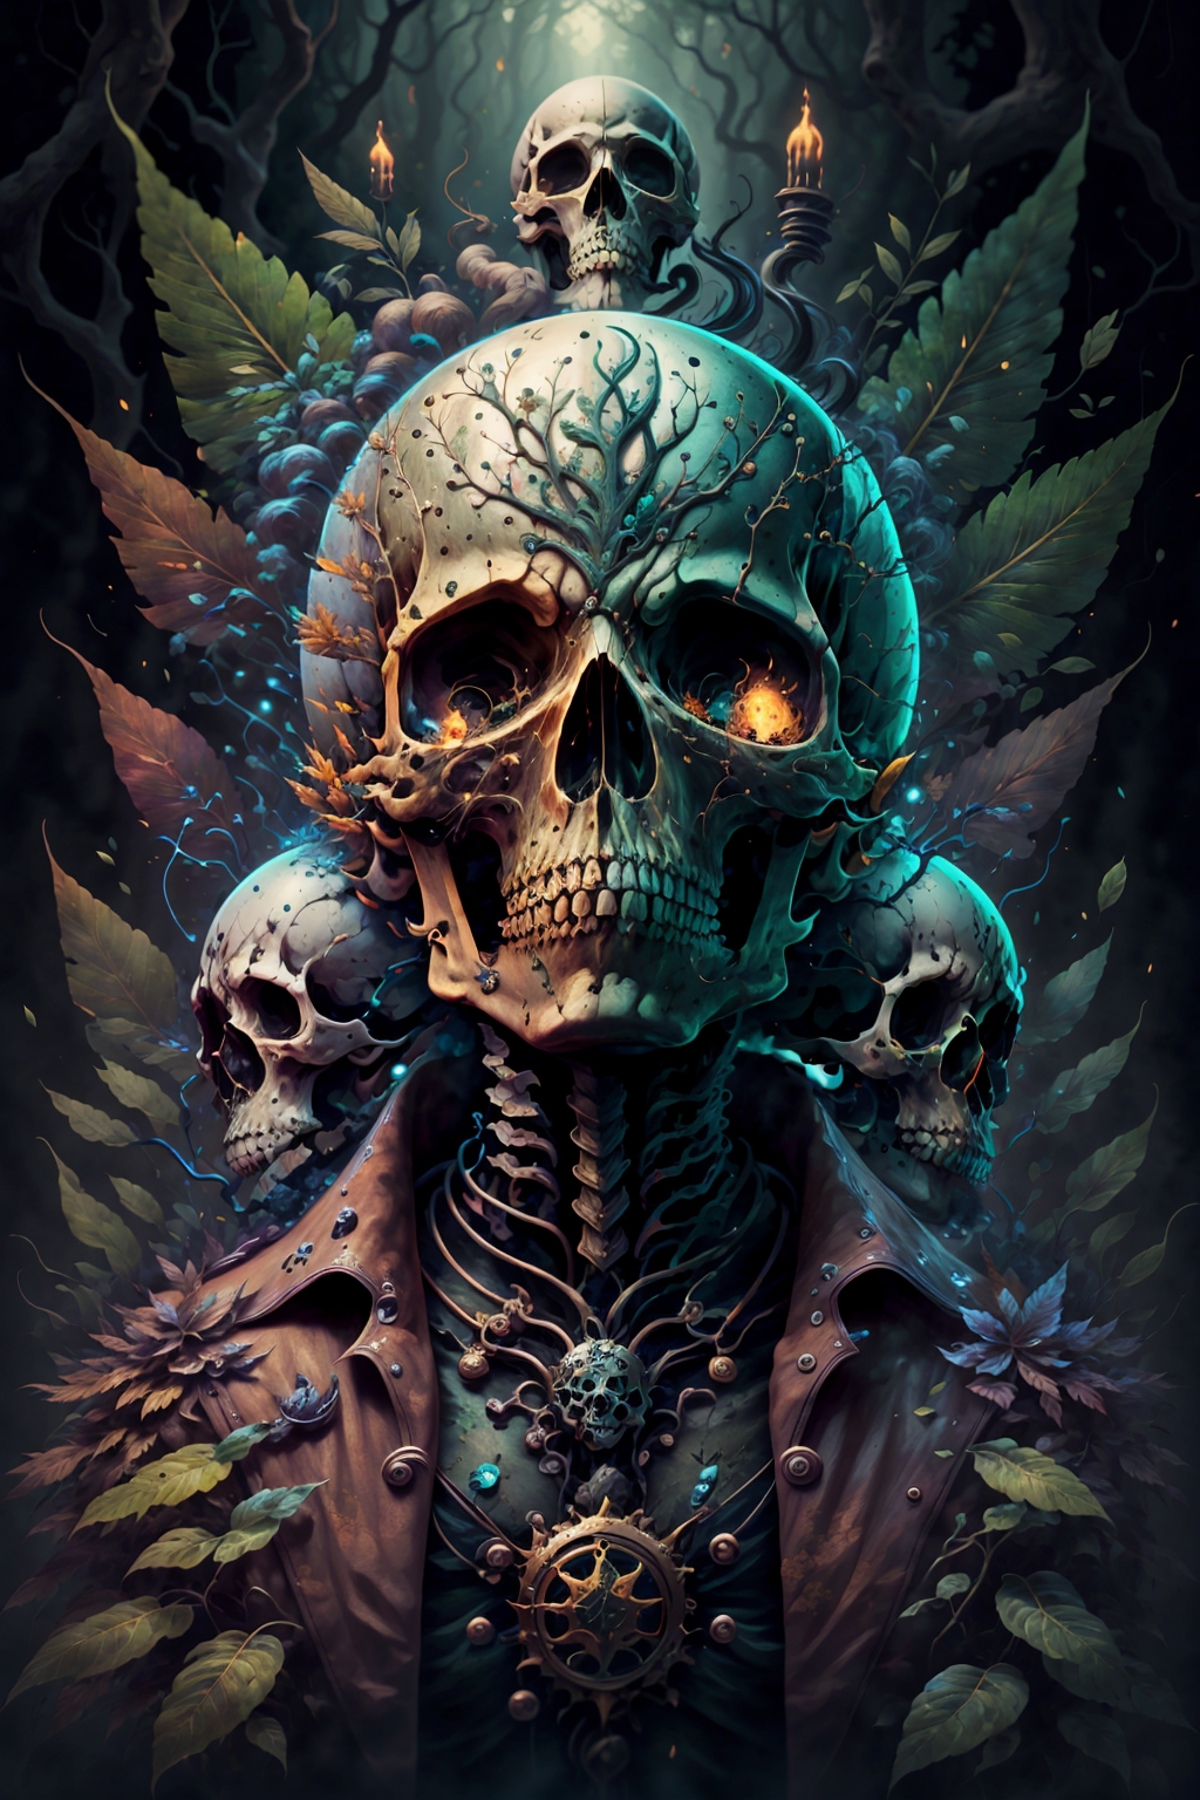 Skull image by muf00d